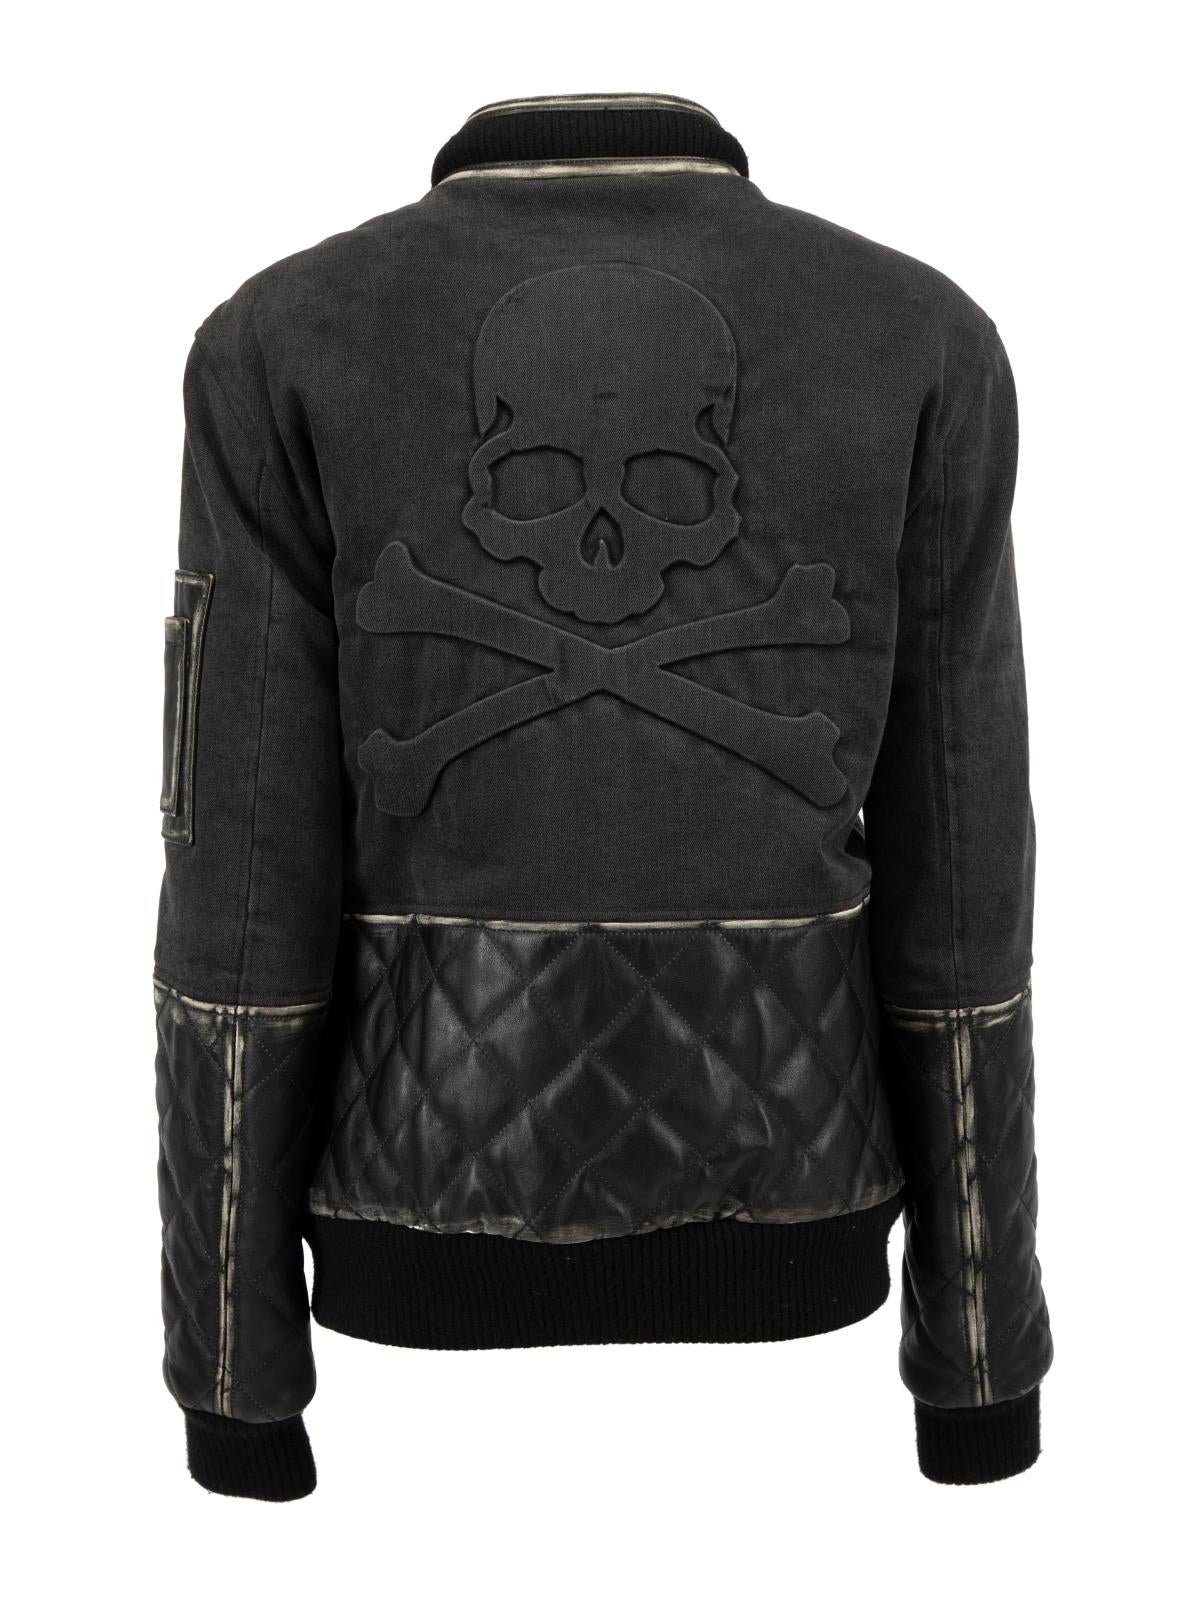 Pre-Loved Philipp Plein Women's Dark Grey Cotton Bomber with Calf Leather In Excellent Condition For Sale In London, GB